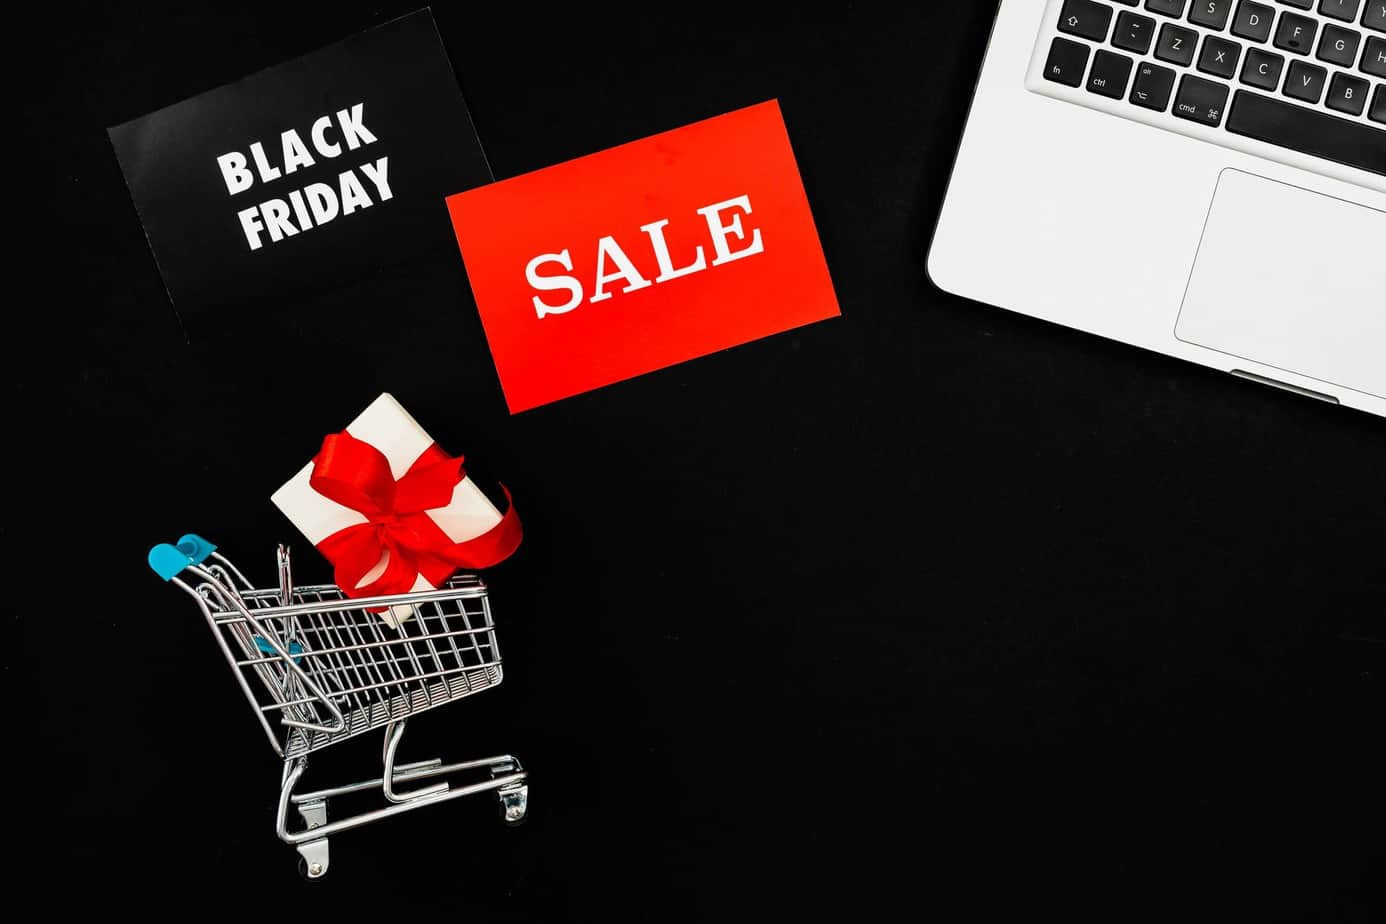 Black Friday Safety Tips: How to Navigate the Shopping Frenzy